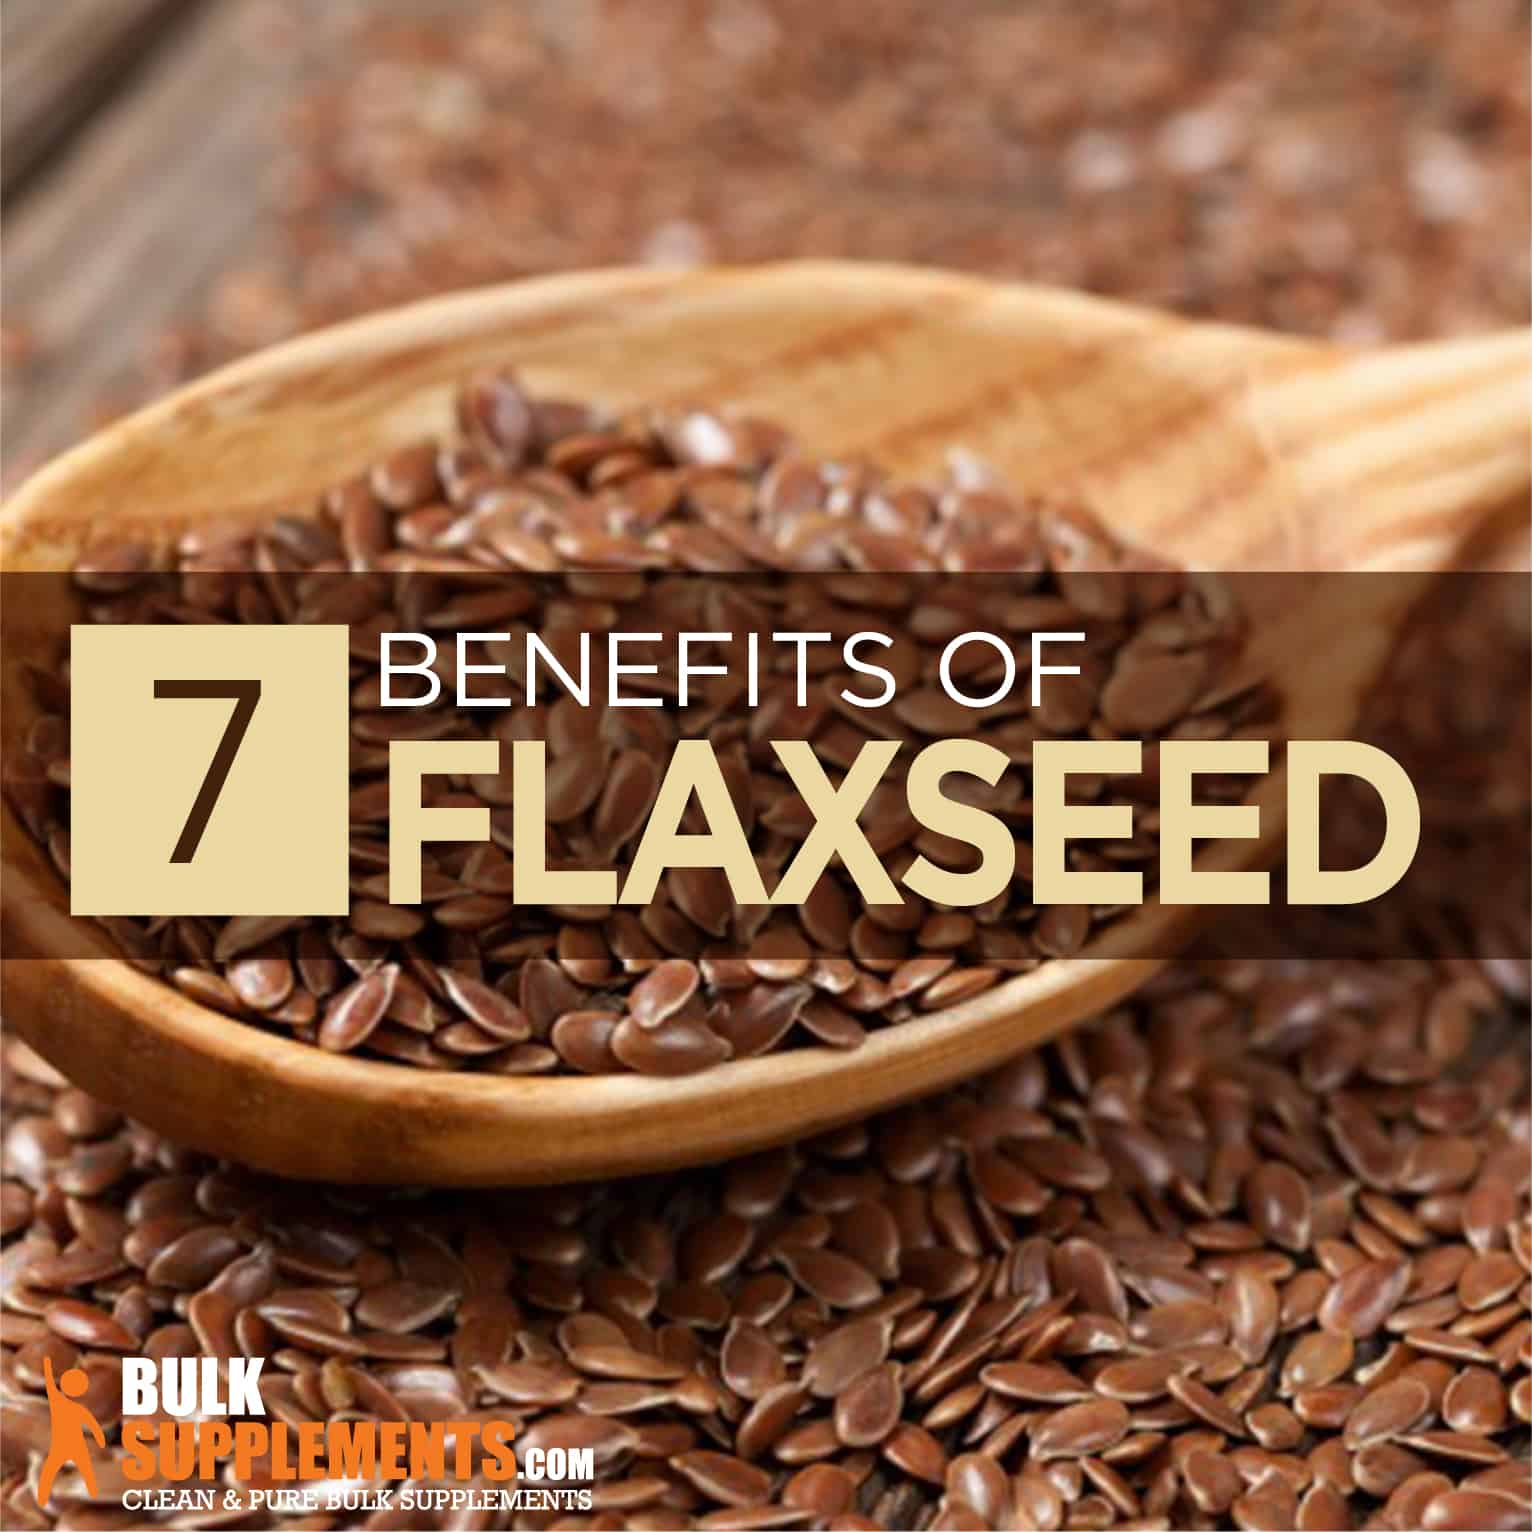 Flaxseed: Benefits, Side Effects & Dosage |